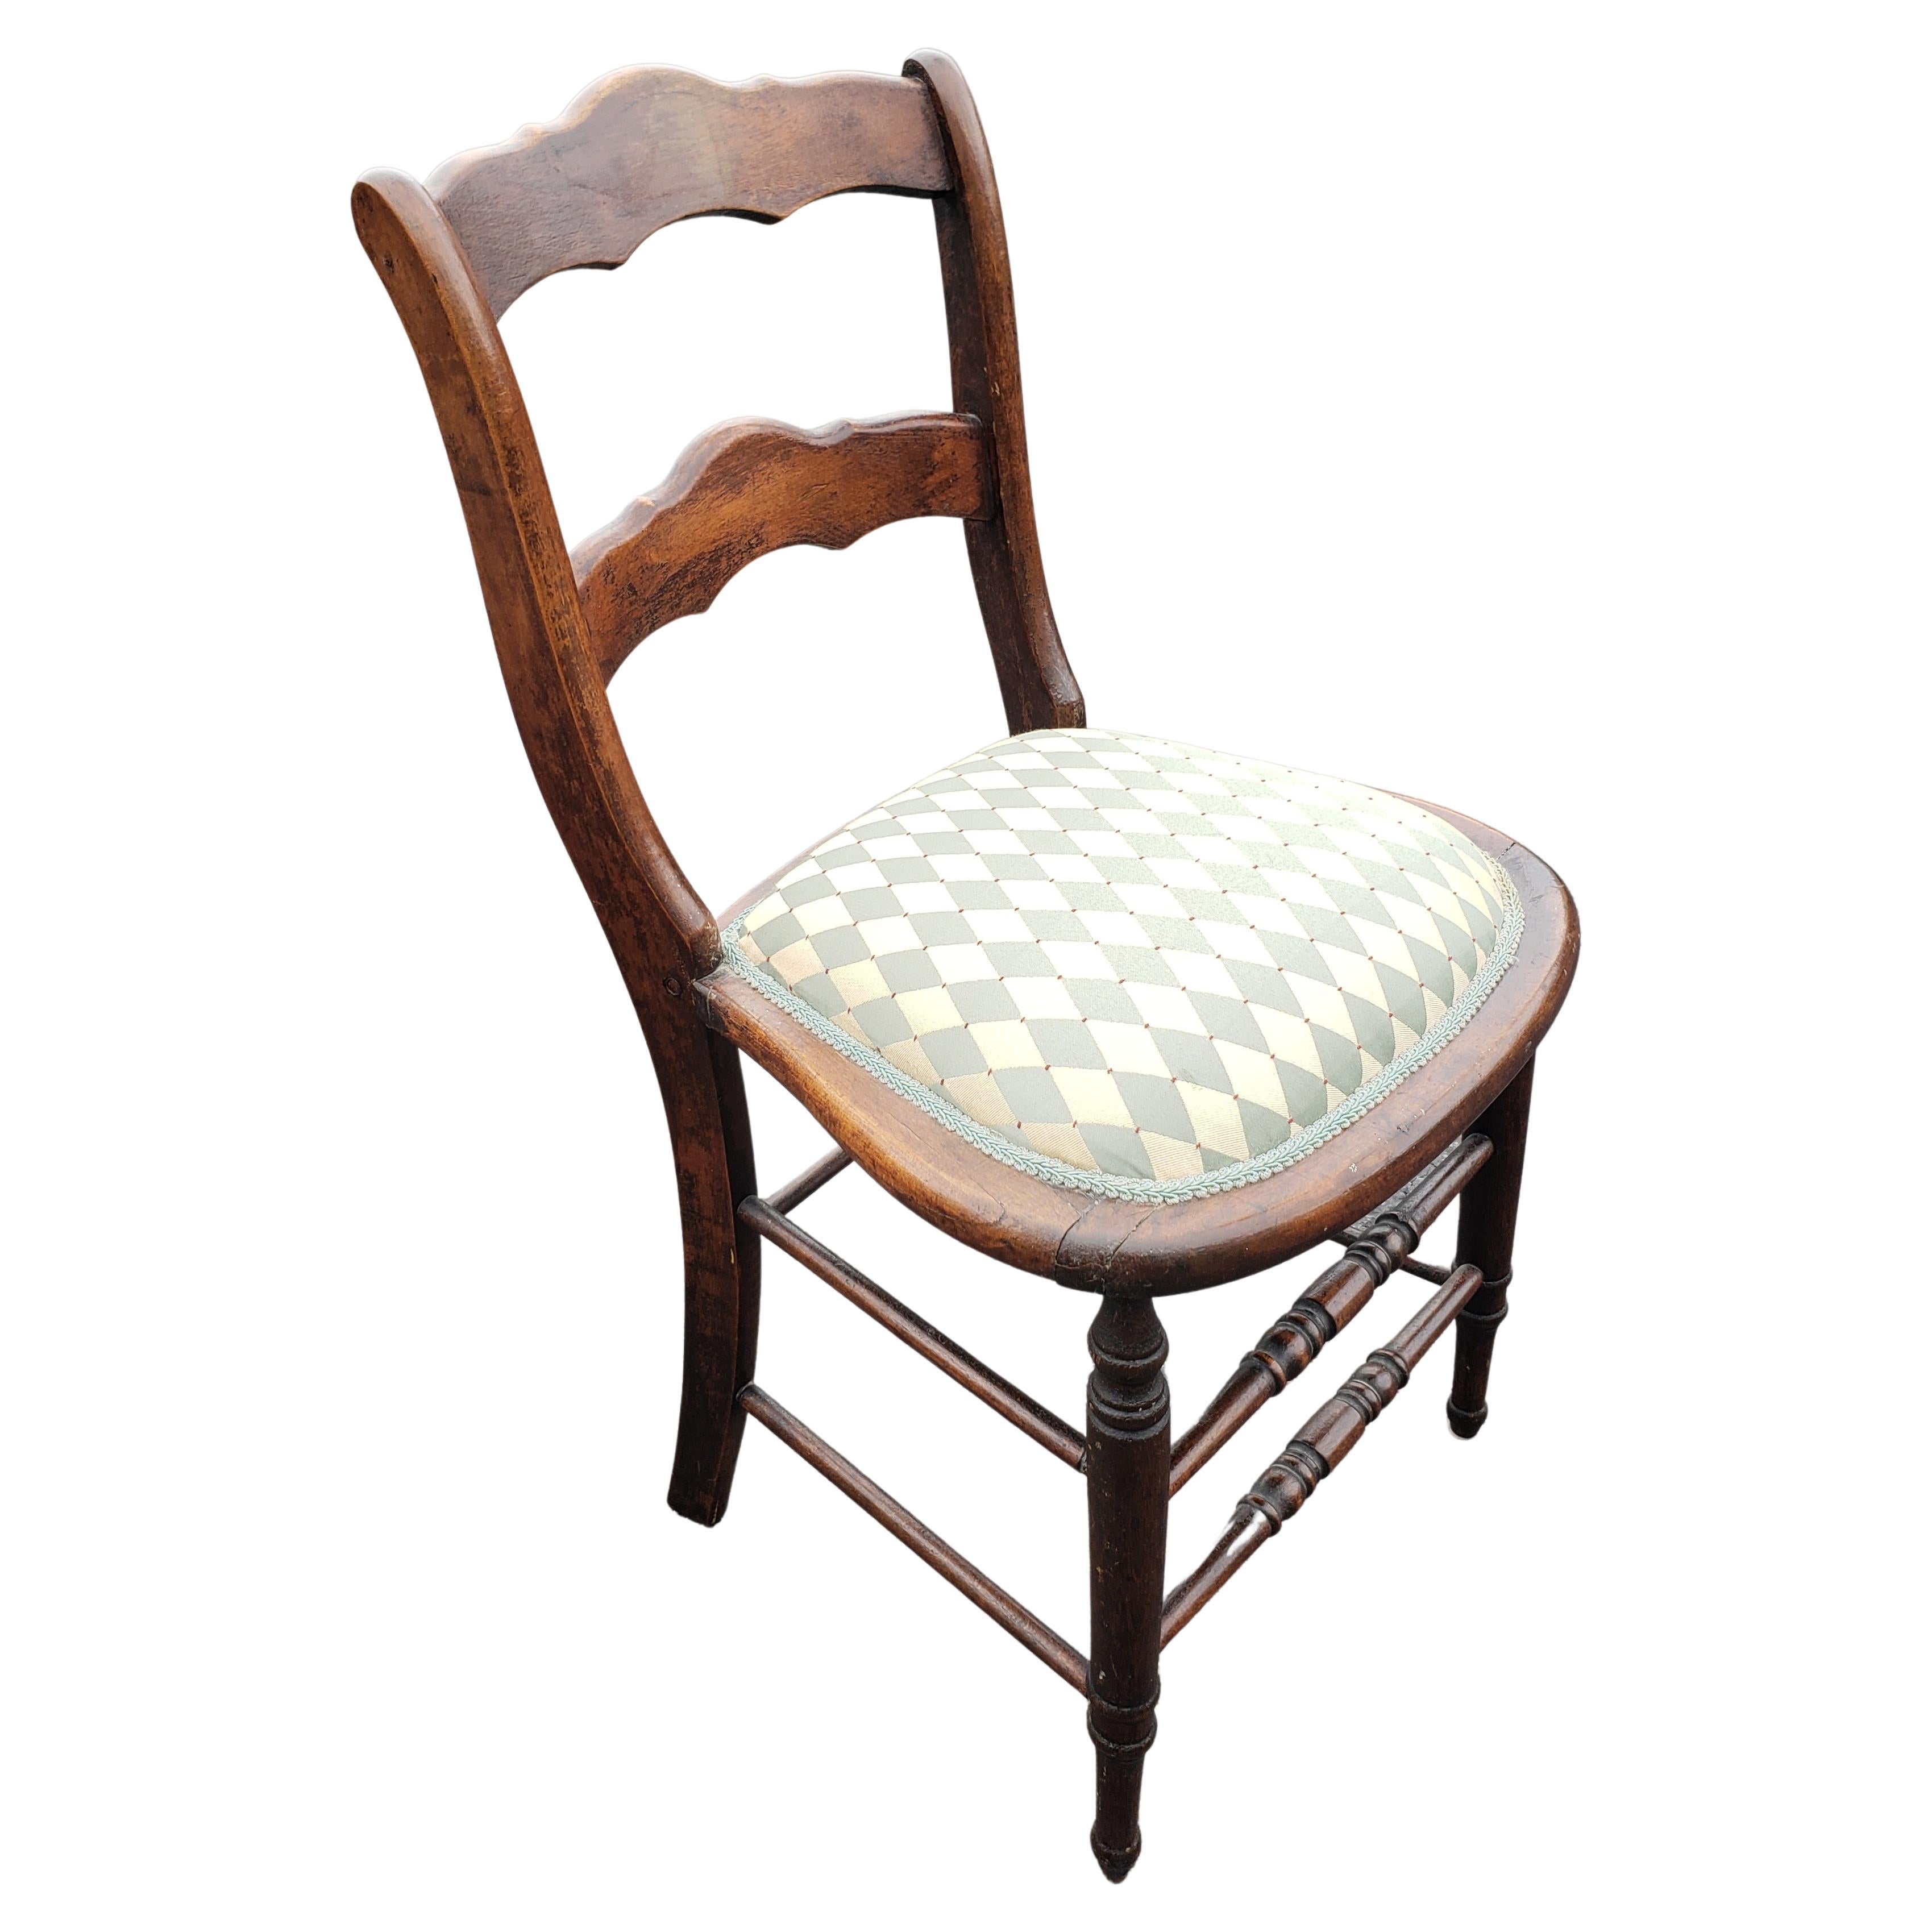 Ladder Back Victorian Reupholstered Mahogany Side Chair, Circa 1860s In Good Condition For Sale In Germantown, MD